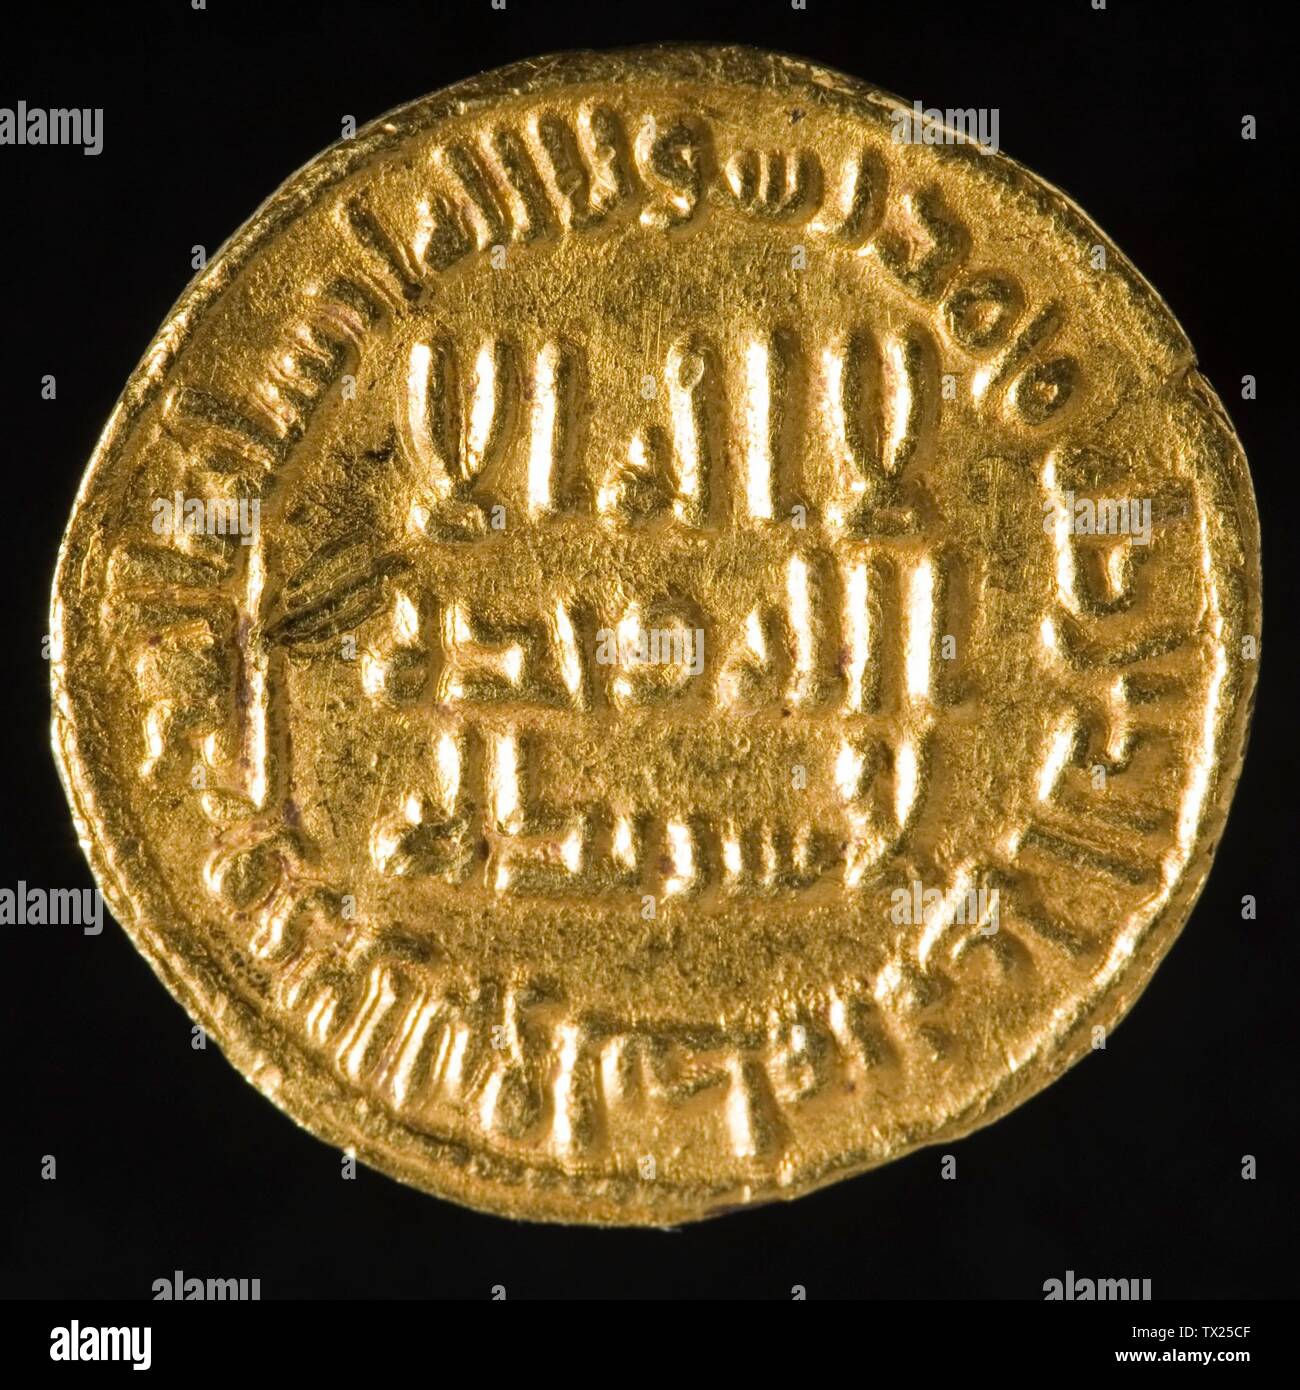 Dinar (image 1 of 2);  Umayyad Caliphate, A.H. 86/705 A.D. Tools and Equipment; coins Gold Diameter:  3/4 in. (1.91 cm); Weight:  0.15 oz (4.27 g) Purchased with funds provided by the Joan Palevsky Bequest (M.2006.143.5) Islamic Art; A.H. 86/705 A.D.; Stock Photo